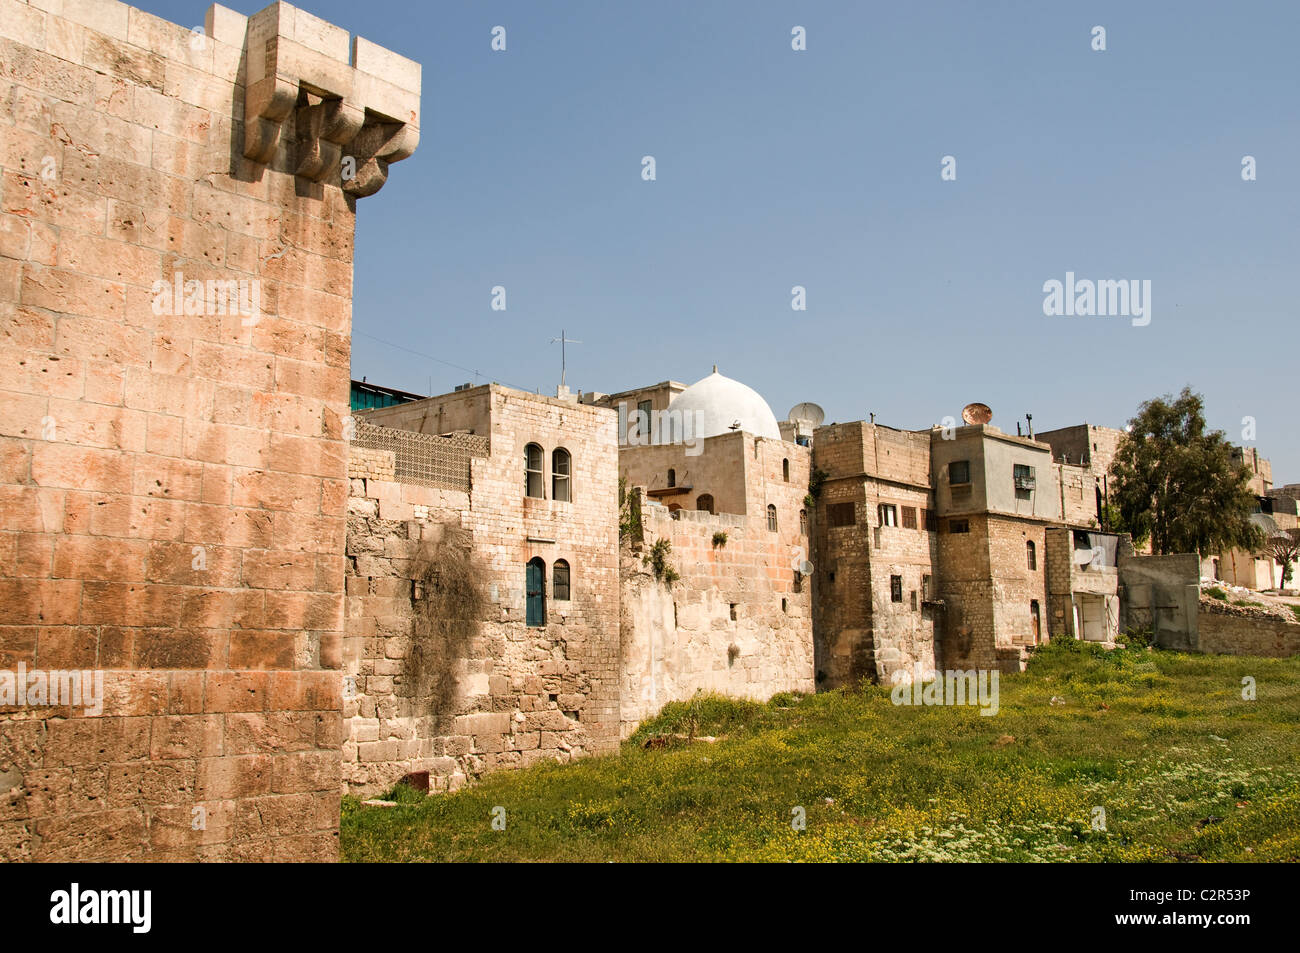 Old Town Wall Aleppo  City Syria Syrian Middle East Stock Photo